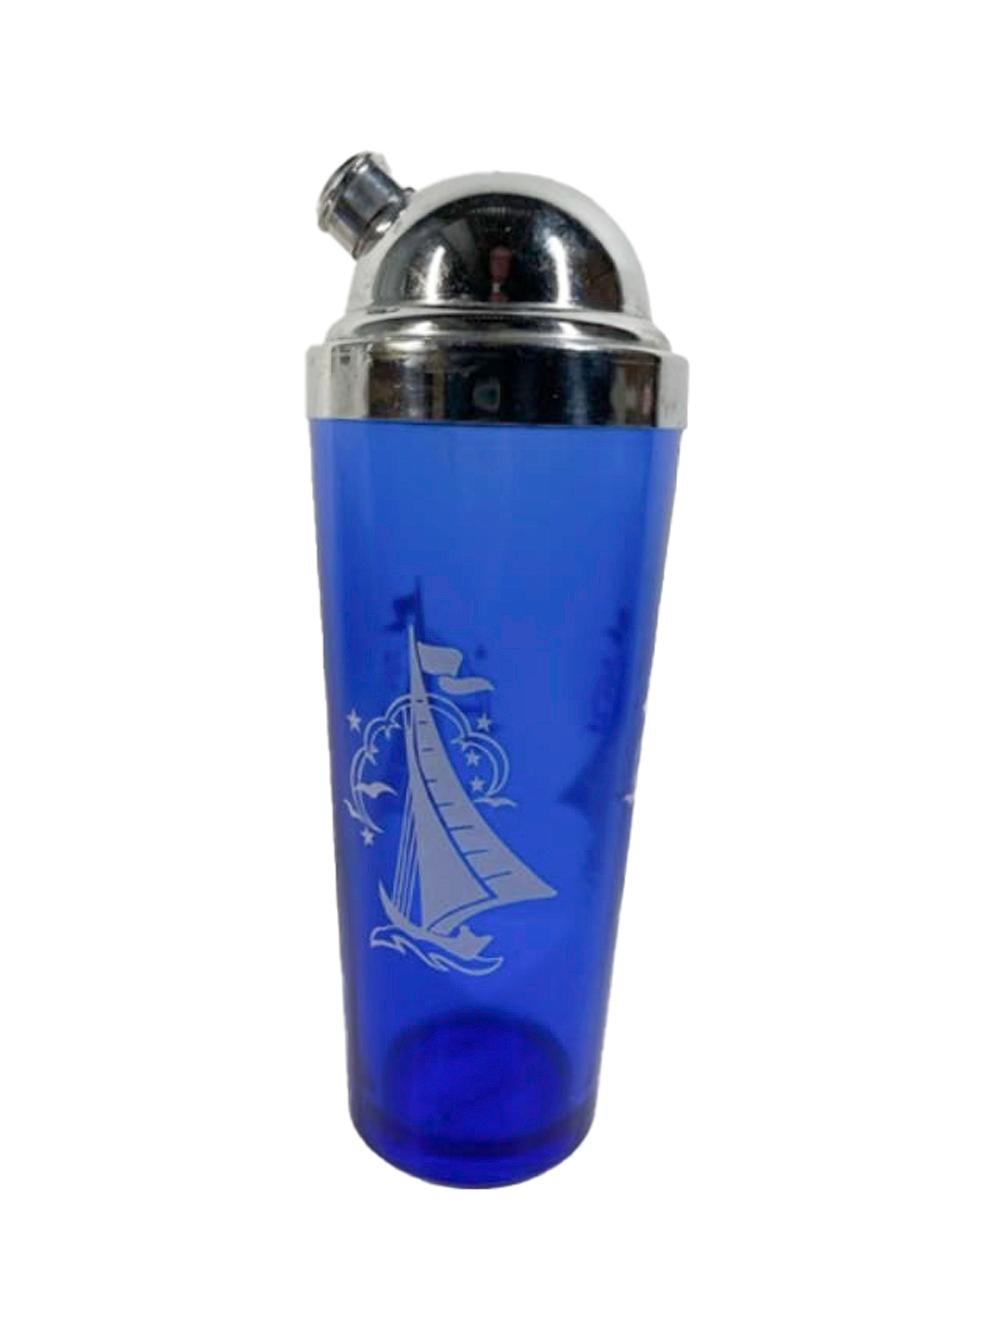 Hazel Atlas 11 Piece Cocktail Shaker and 10 Glasses, Cobalt w/ White Sailboats In Good Condition For Sale In Nantucket, MA